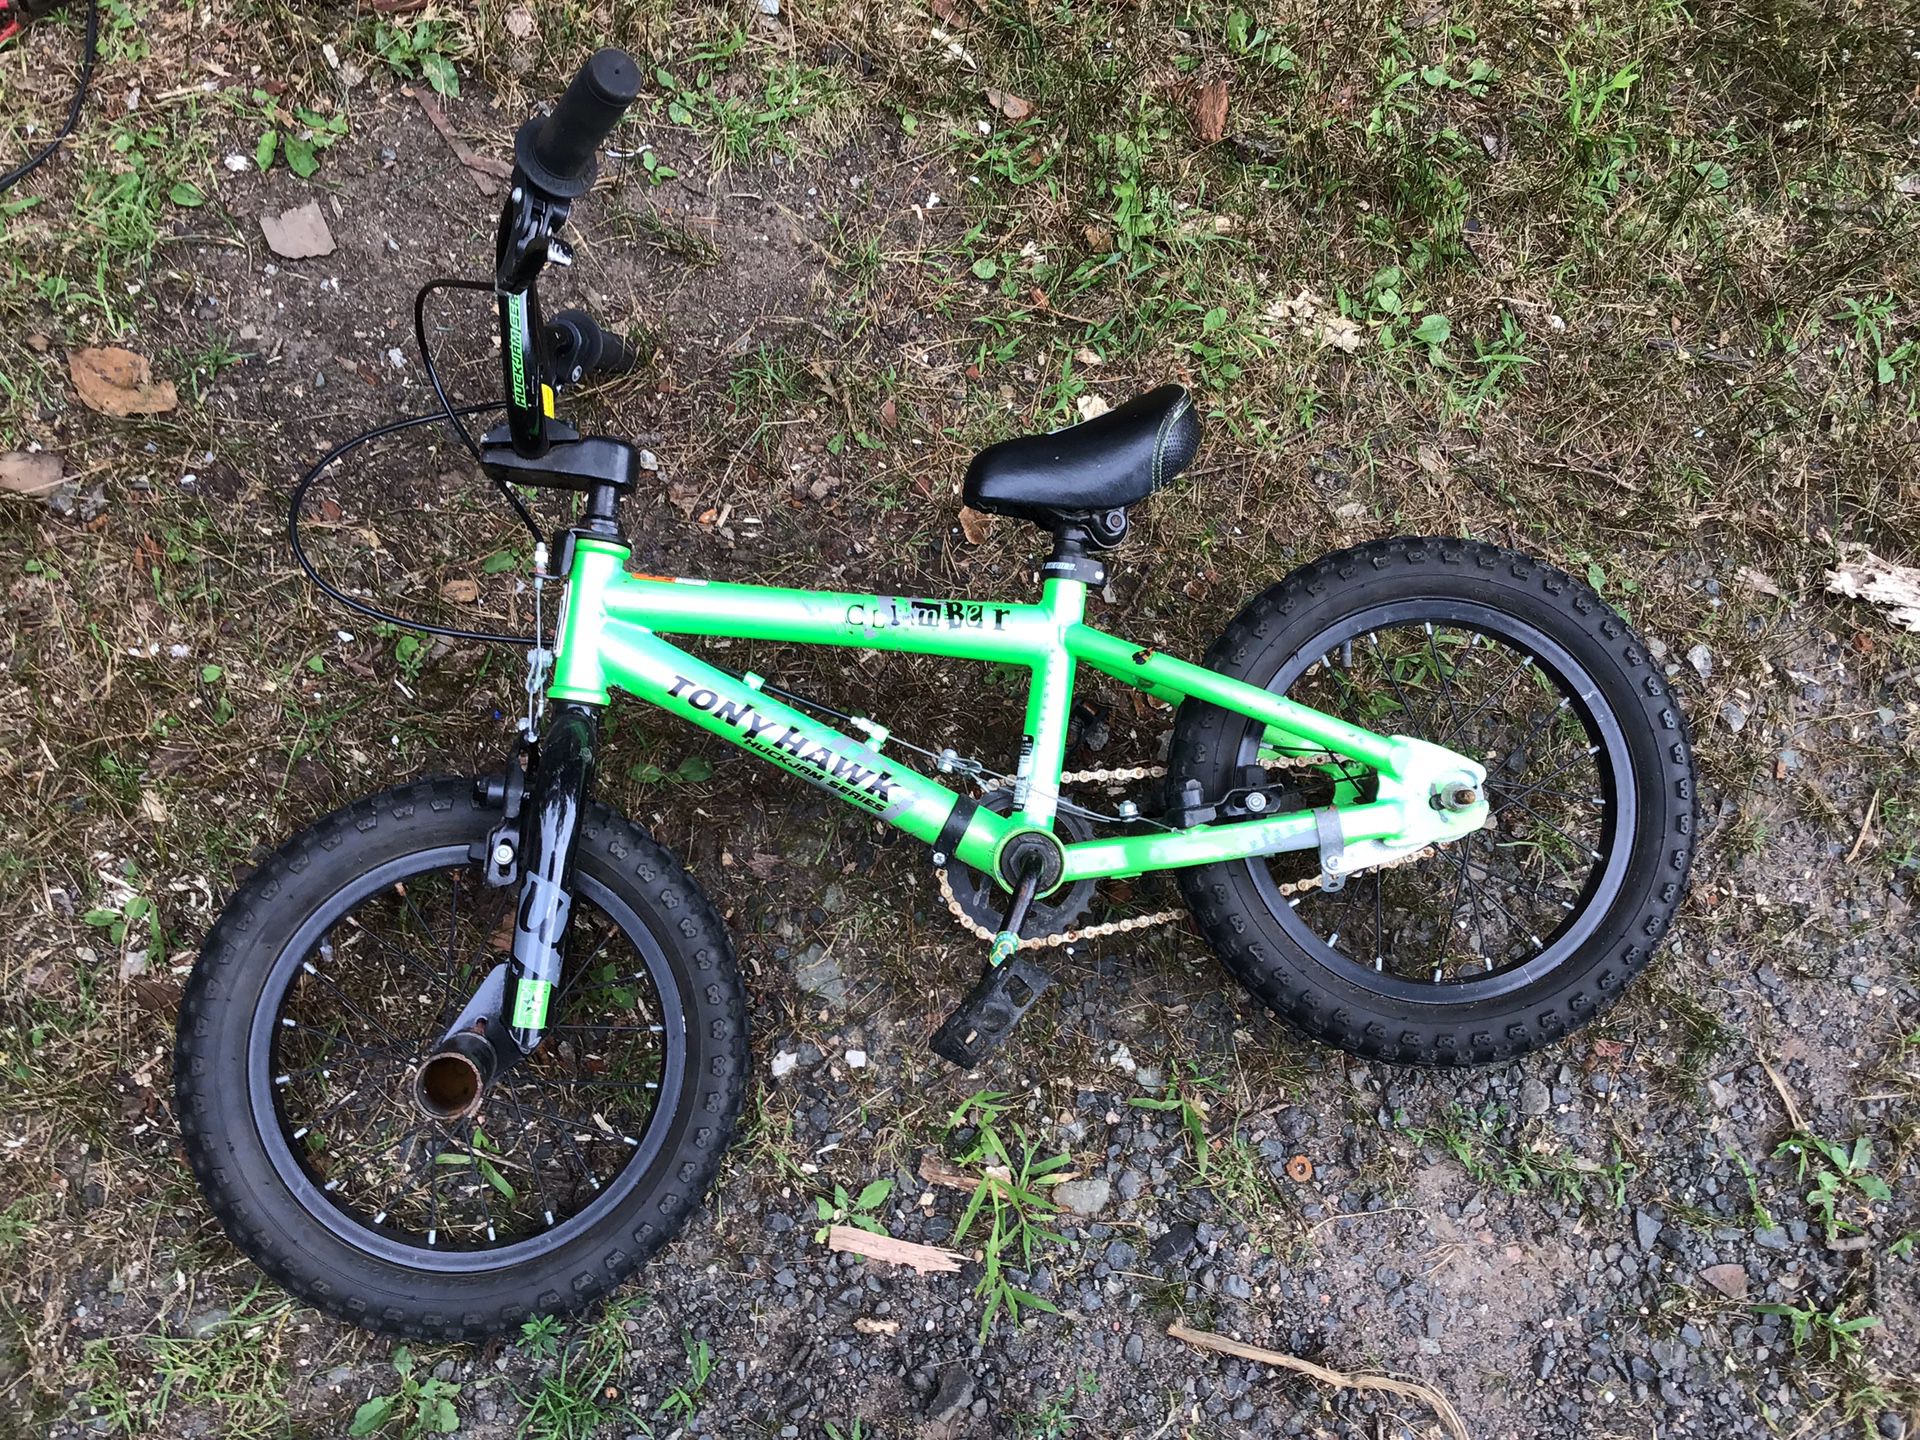 Tony Hawk 14” BMX bike, stainless steel chain, pegs on wheels, tuned up, front and rear brakes. Pegs on wheels make it fun bike